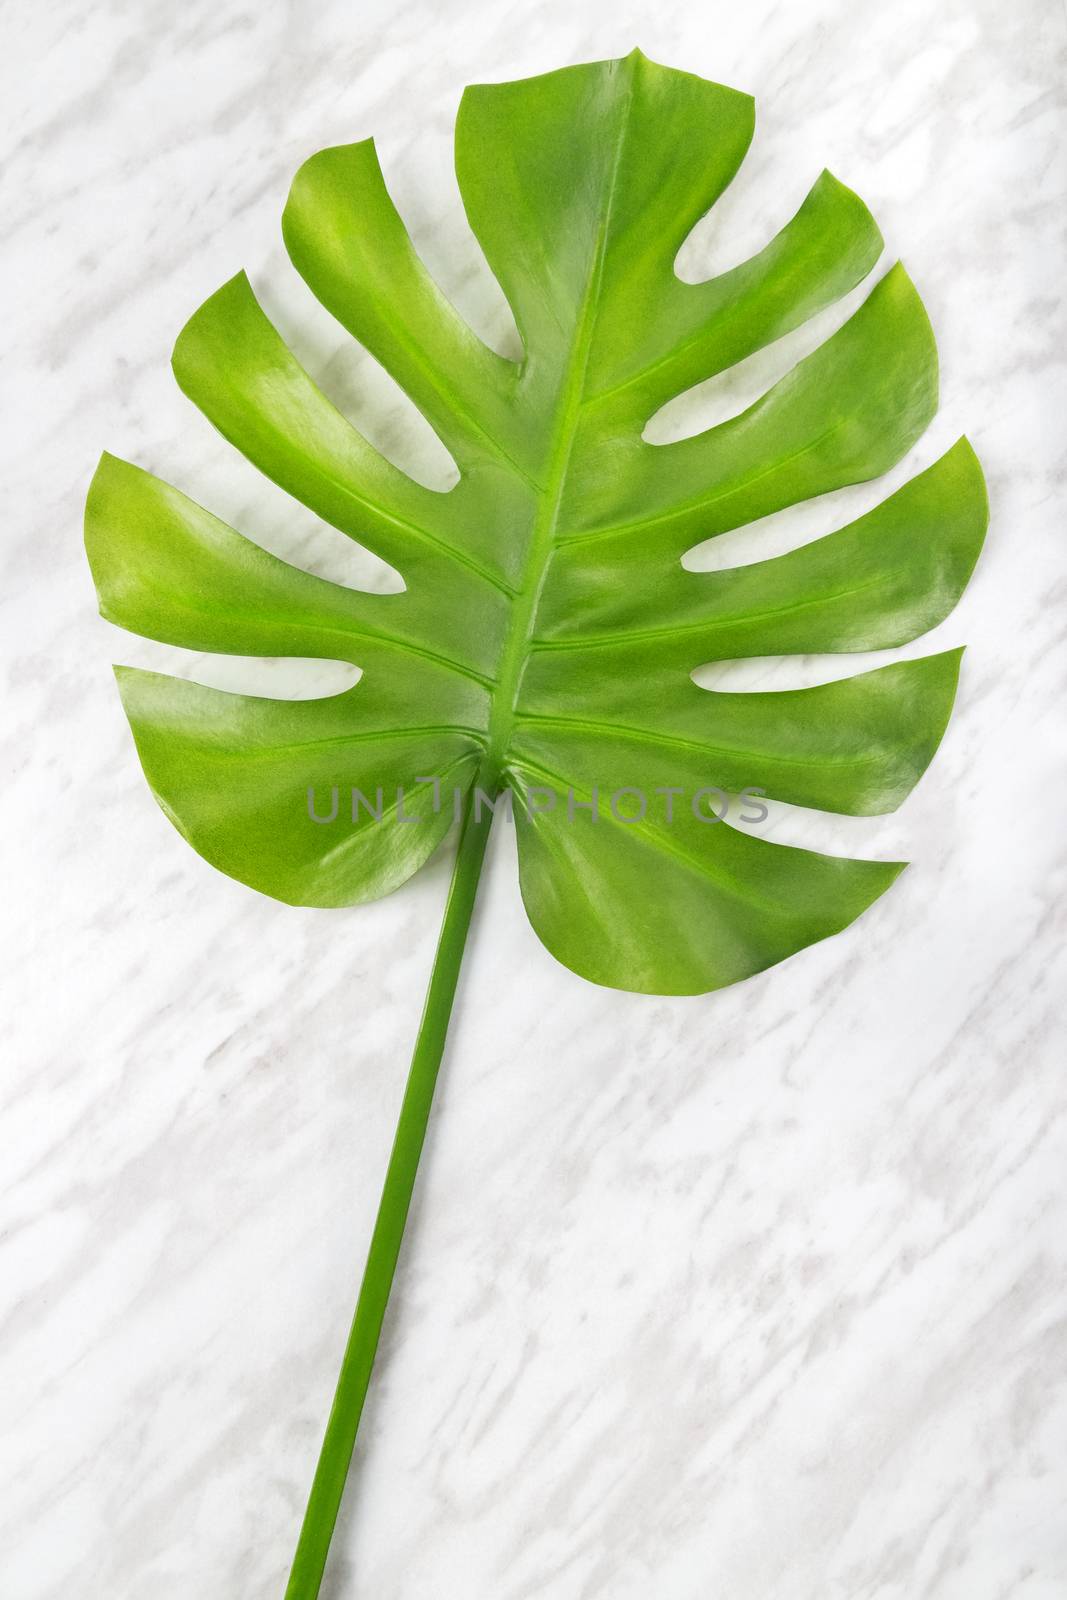 Beautiful green Monstera leaf on marble background. Tropical plant popular in home decor.